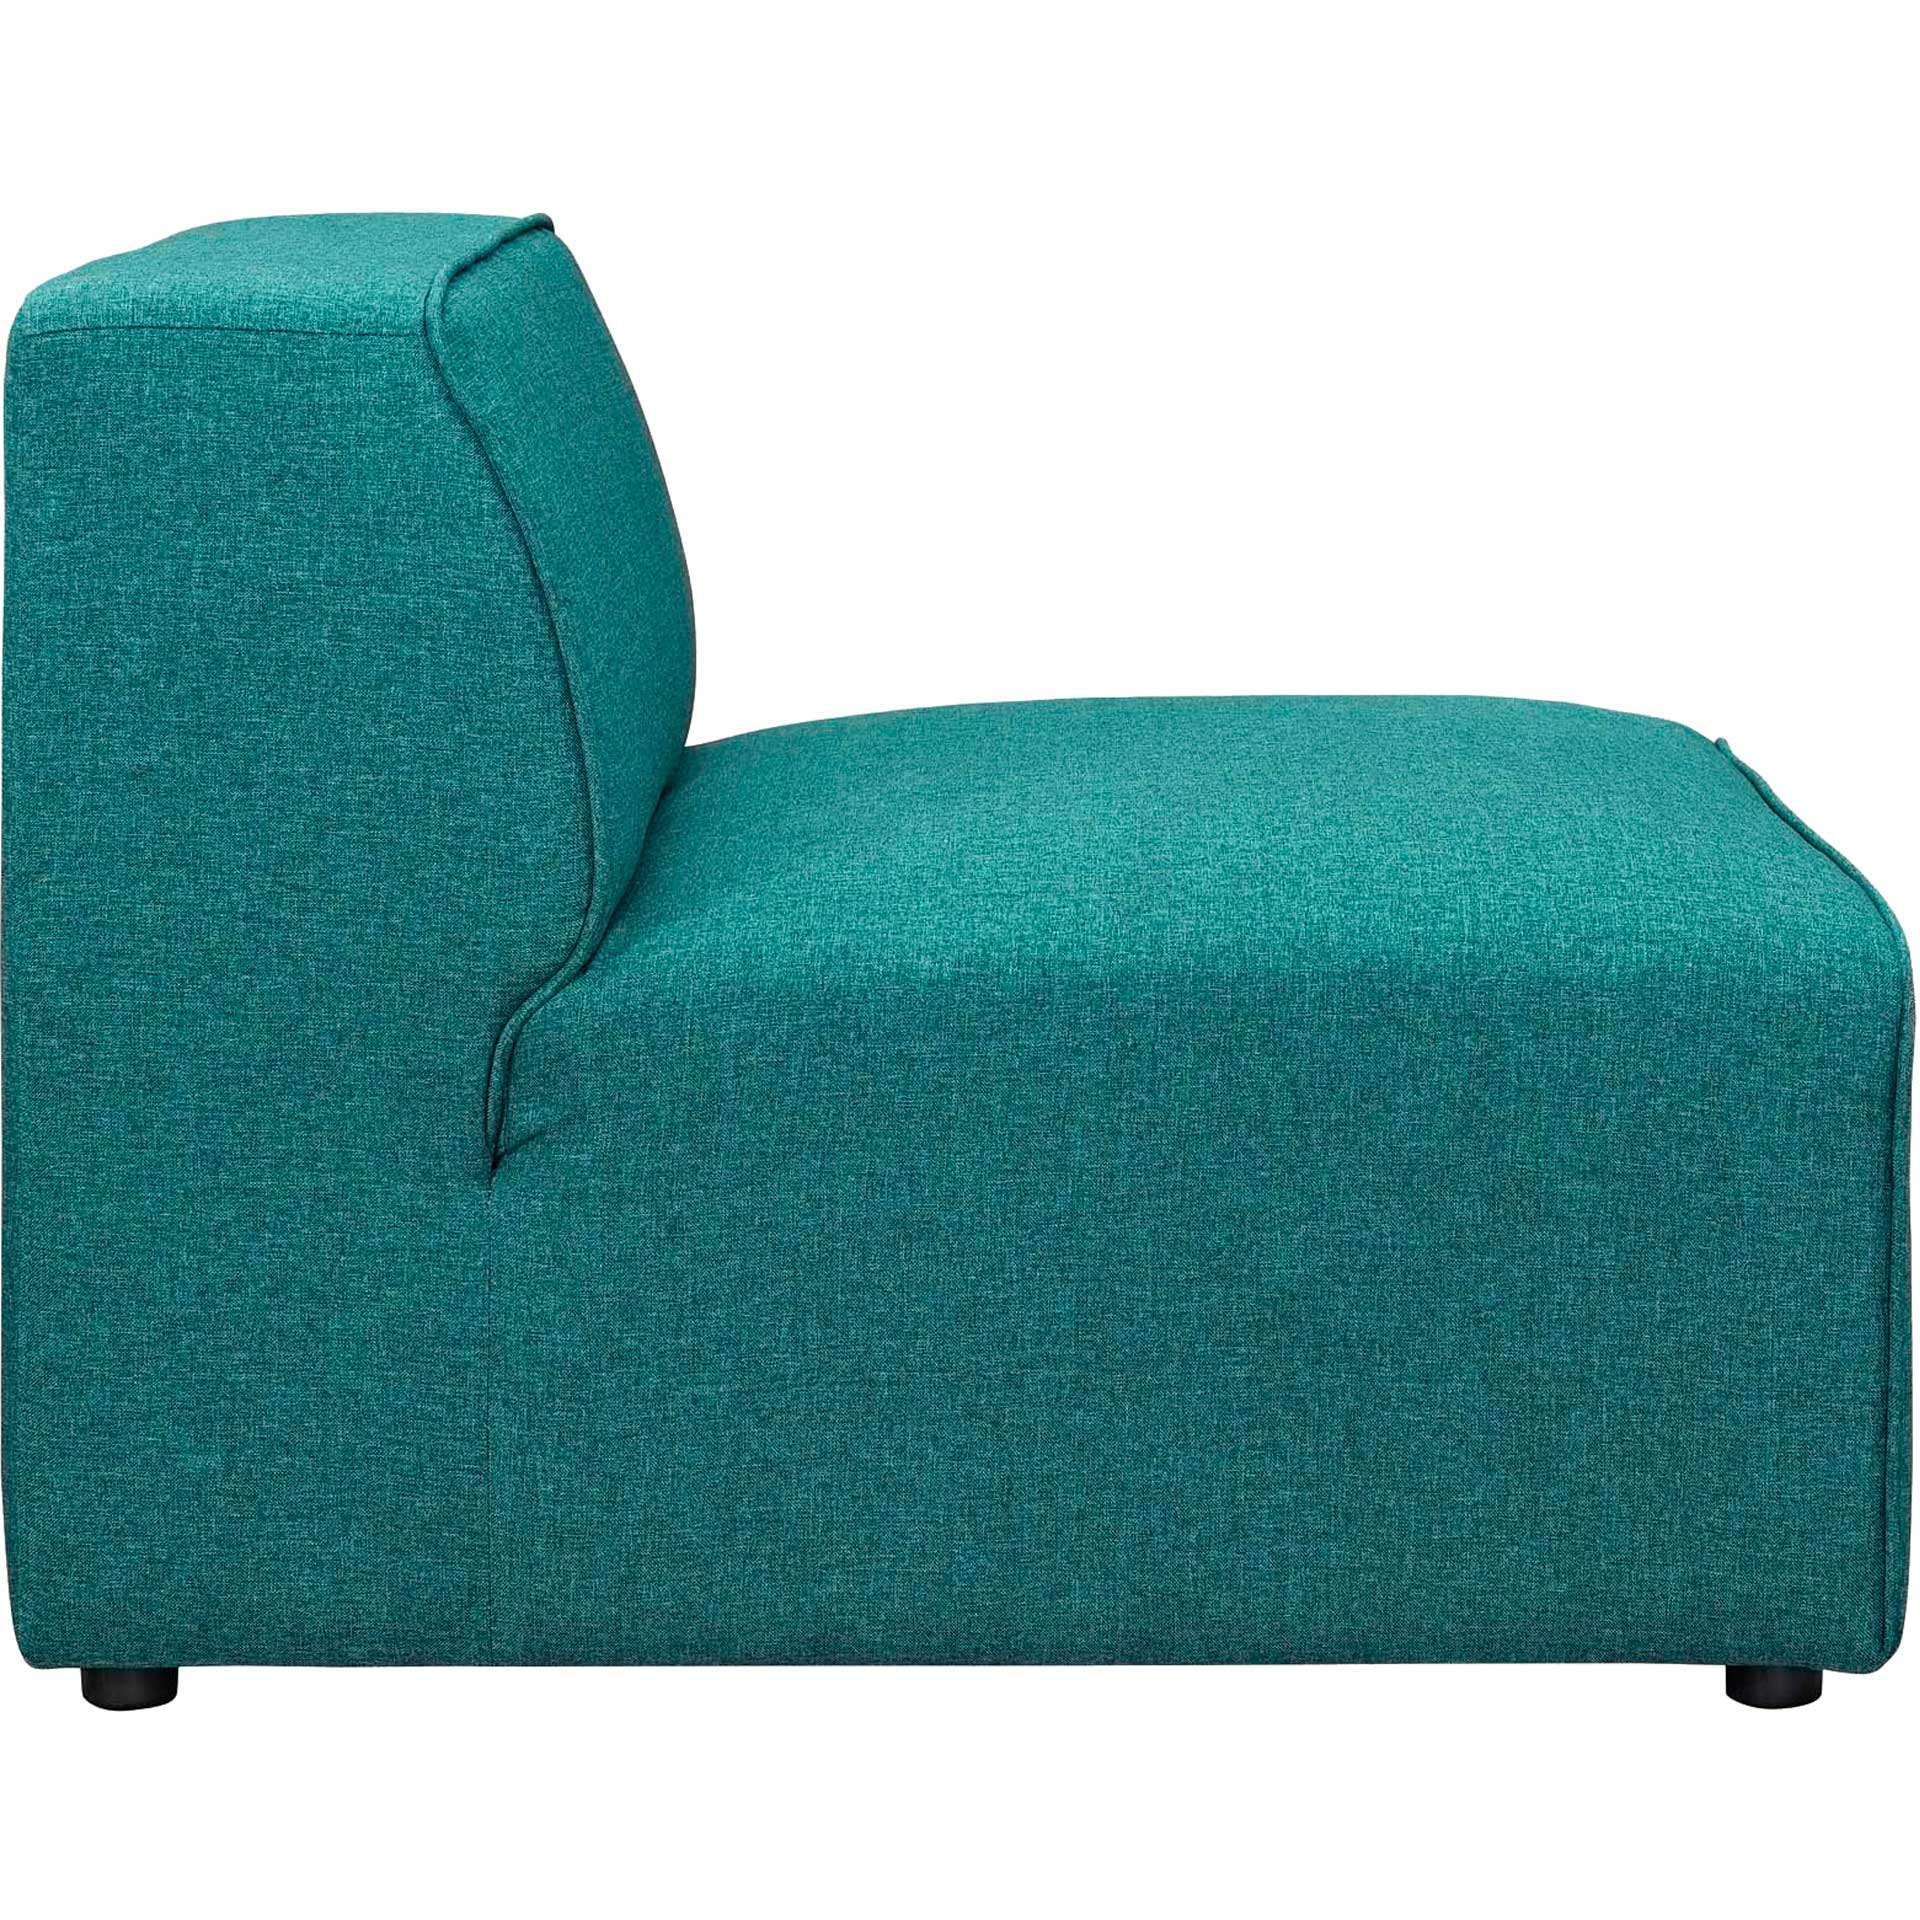 Maisie 7 Piece L-Shaped Armless Sectional Sofa Teal